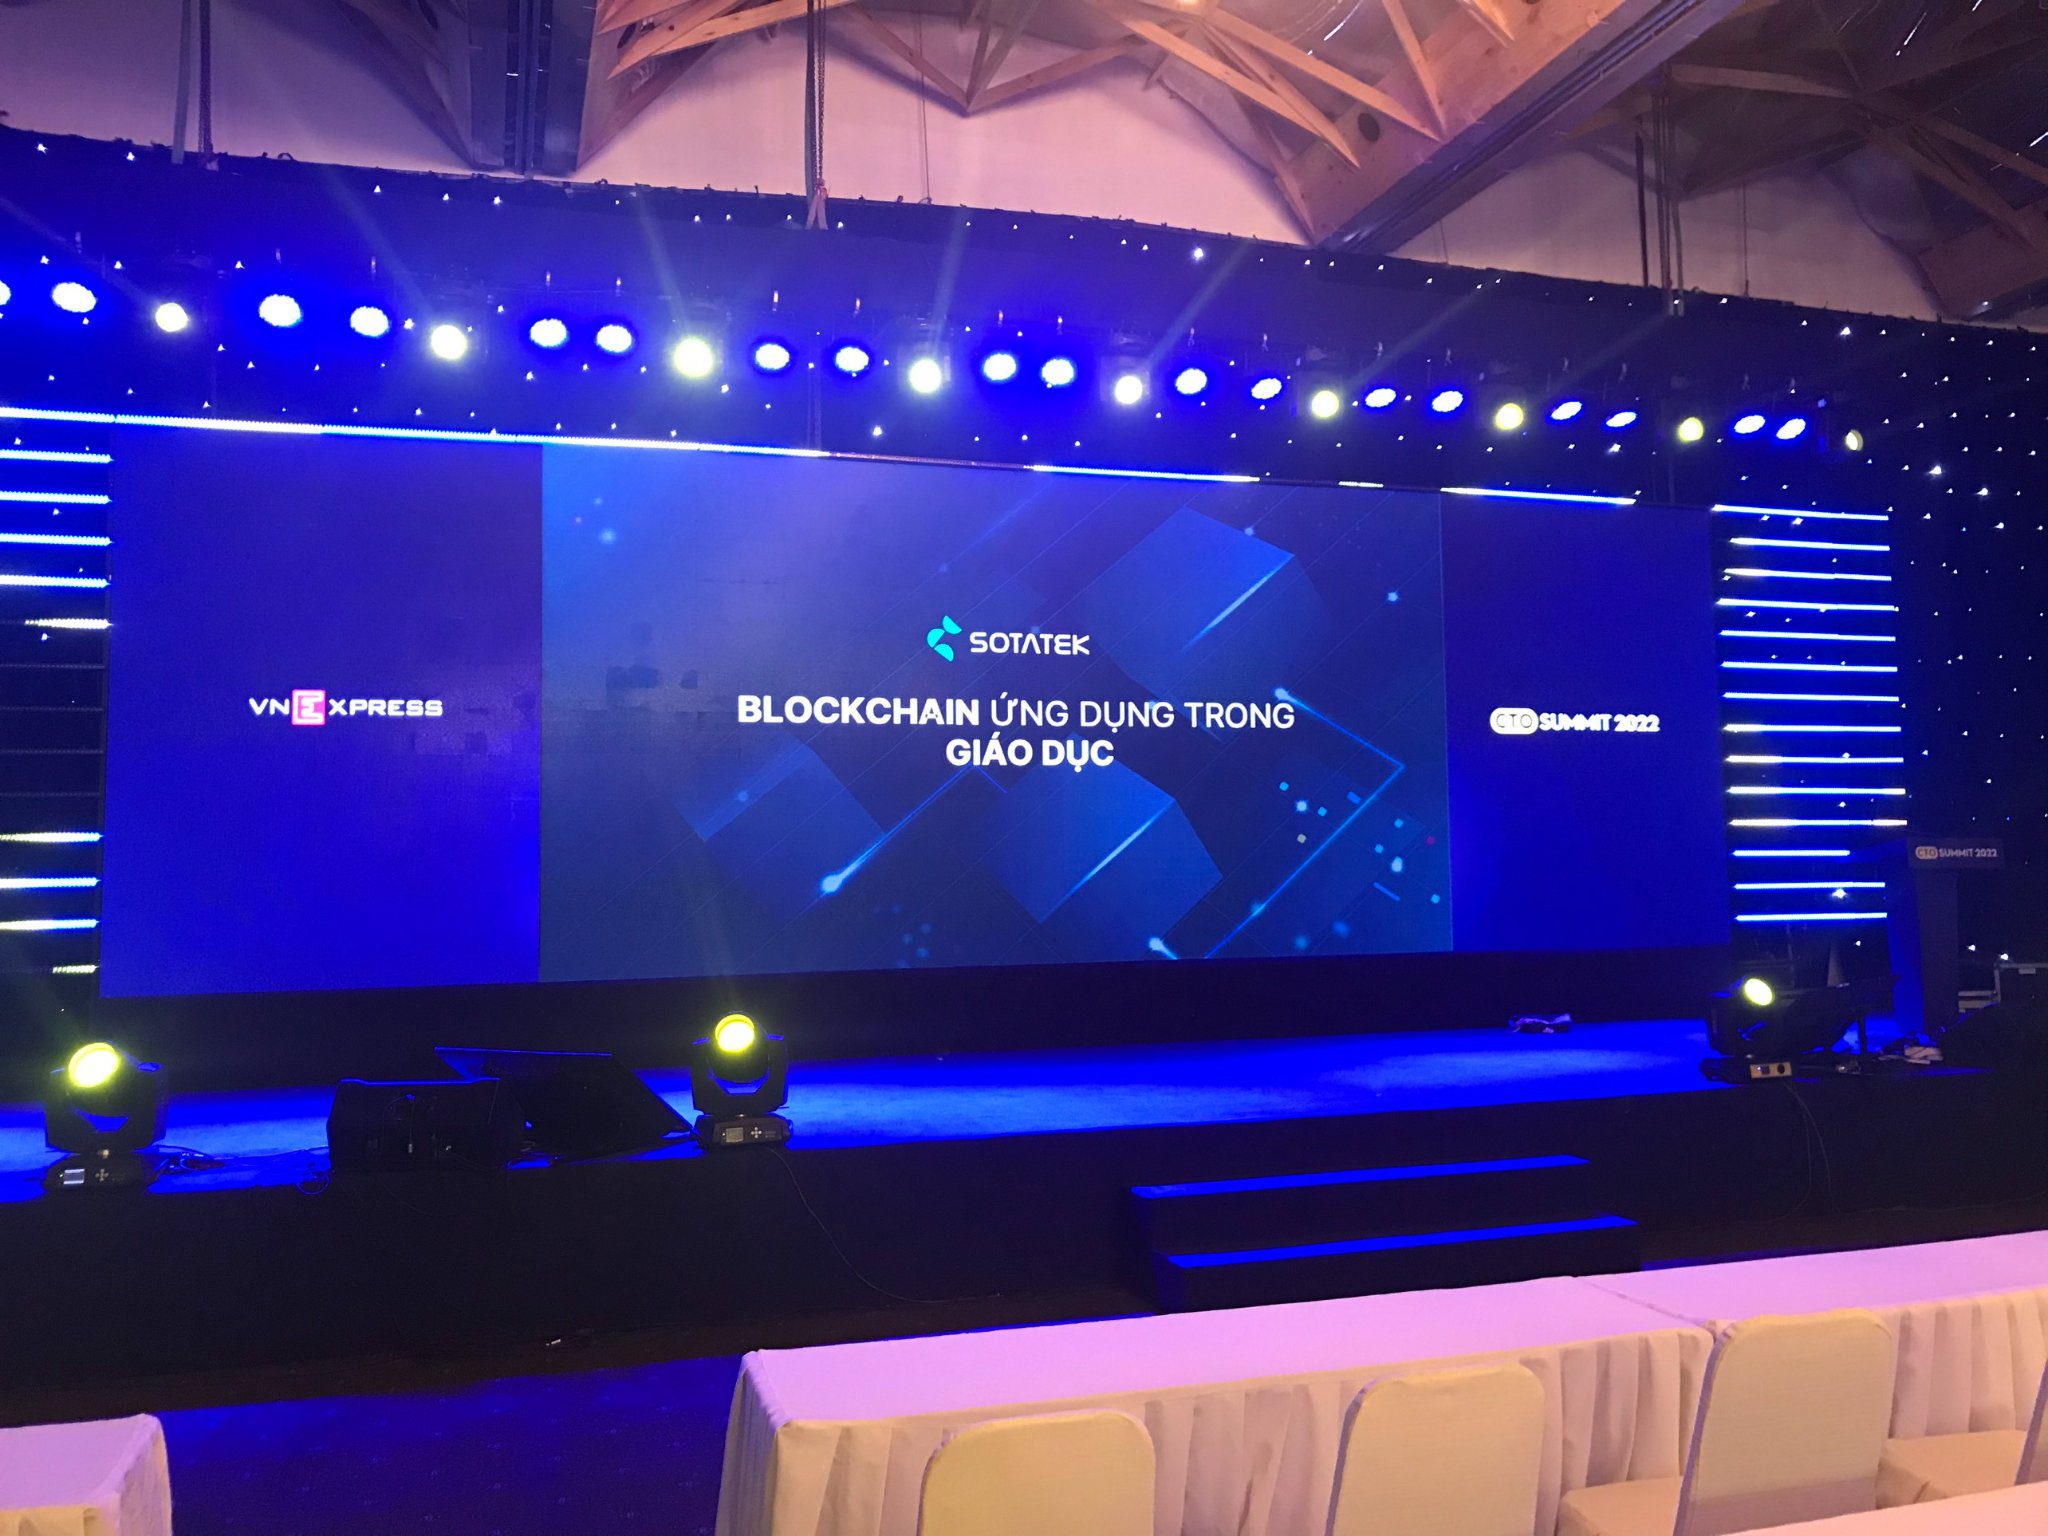 SotaTek’s-Blockchain-Project-Made-a-Strong-Impression-at-CTO-Summit-2022